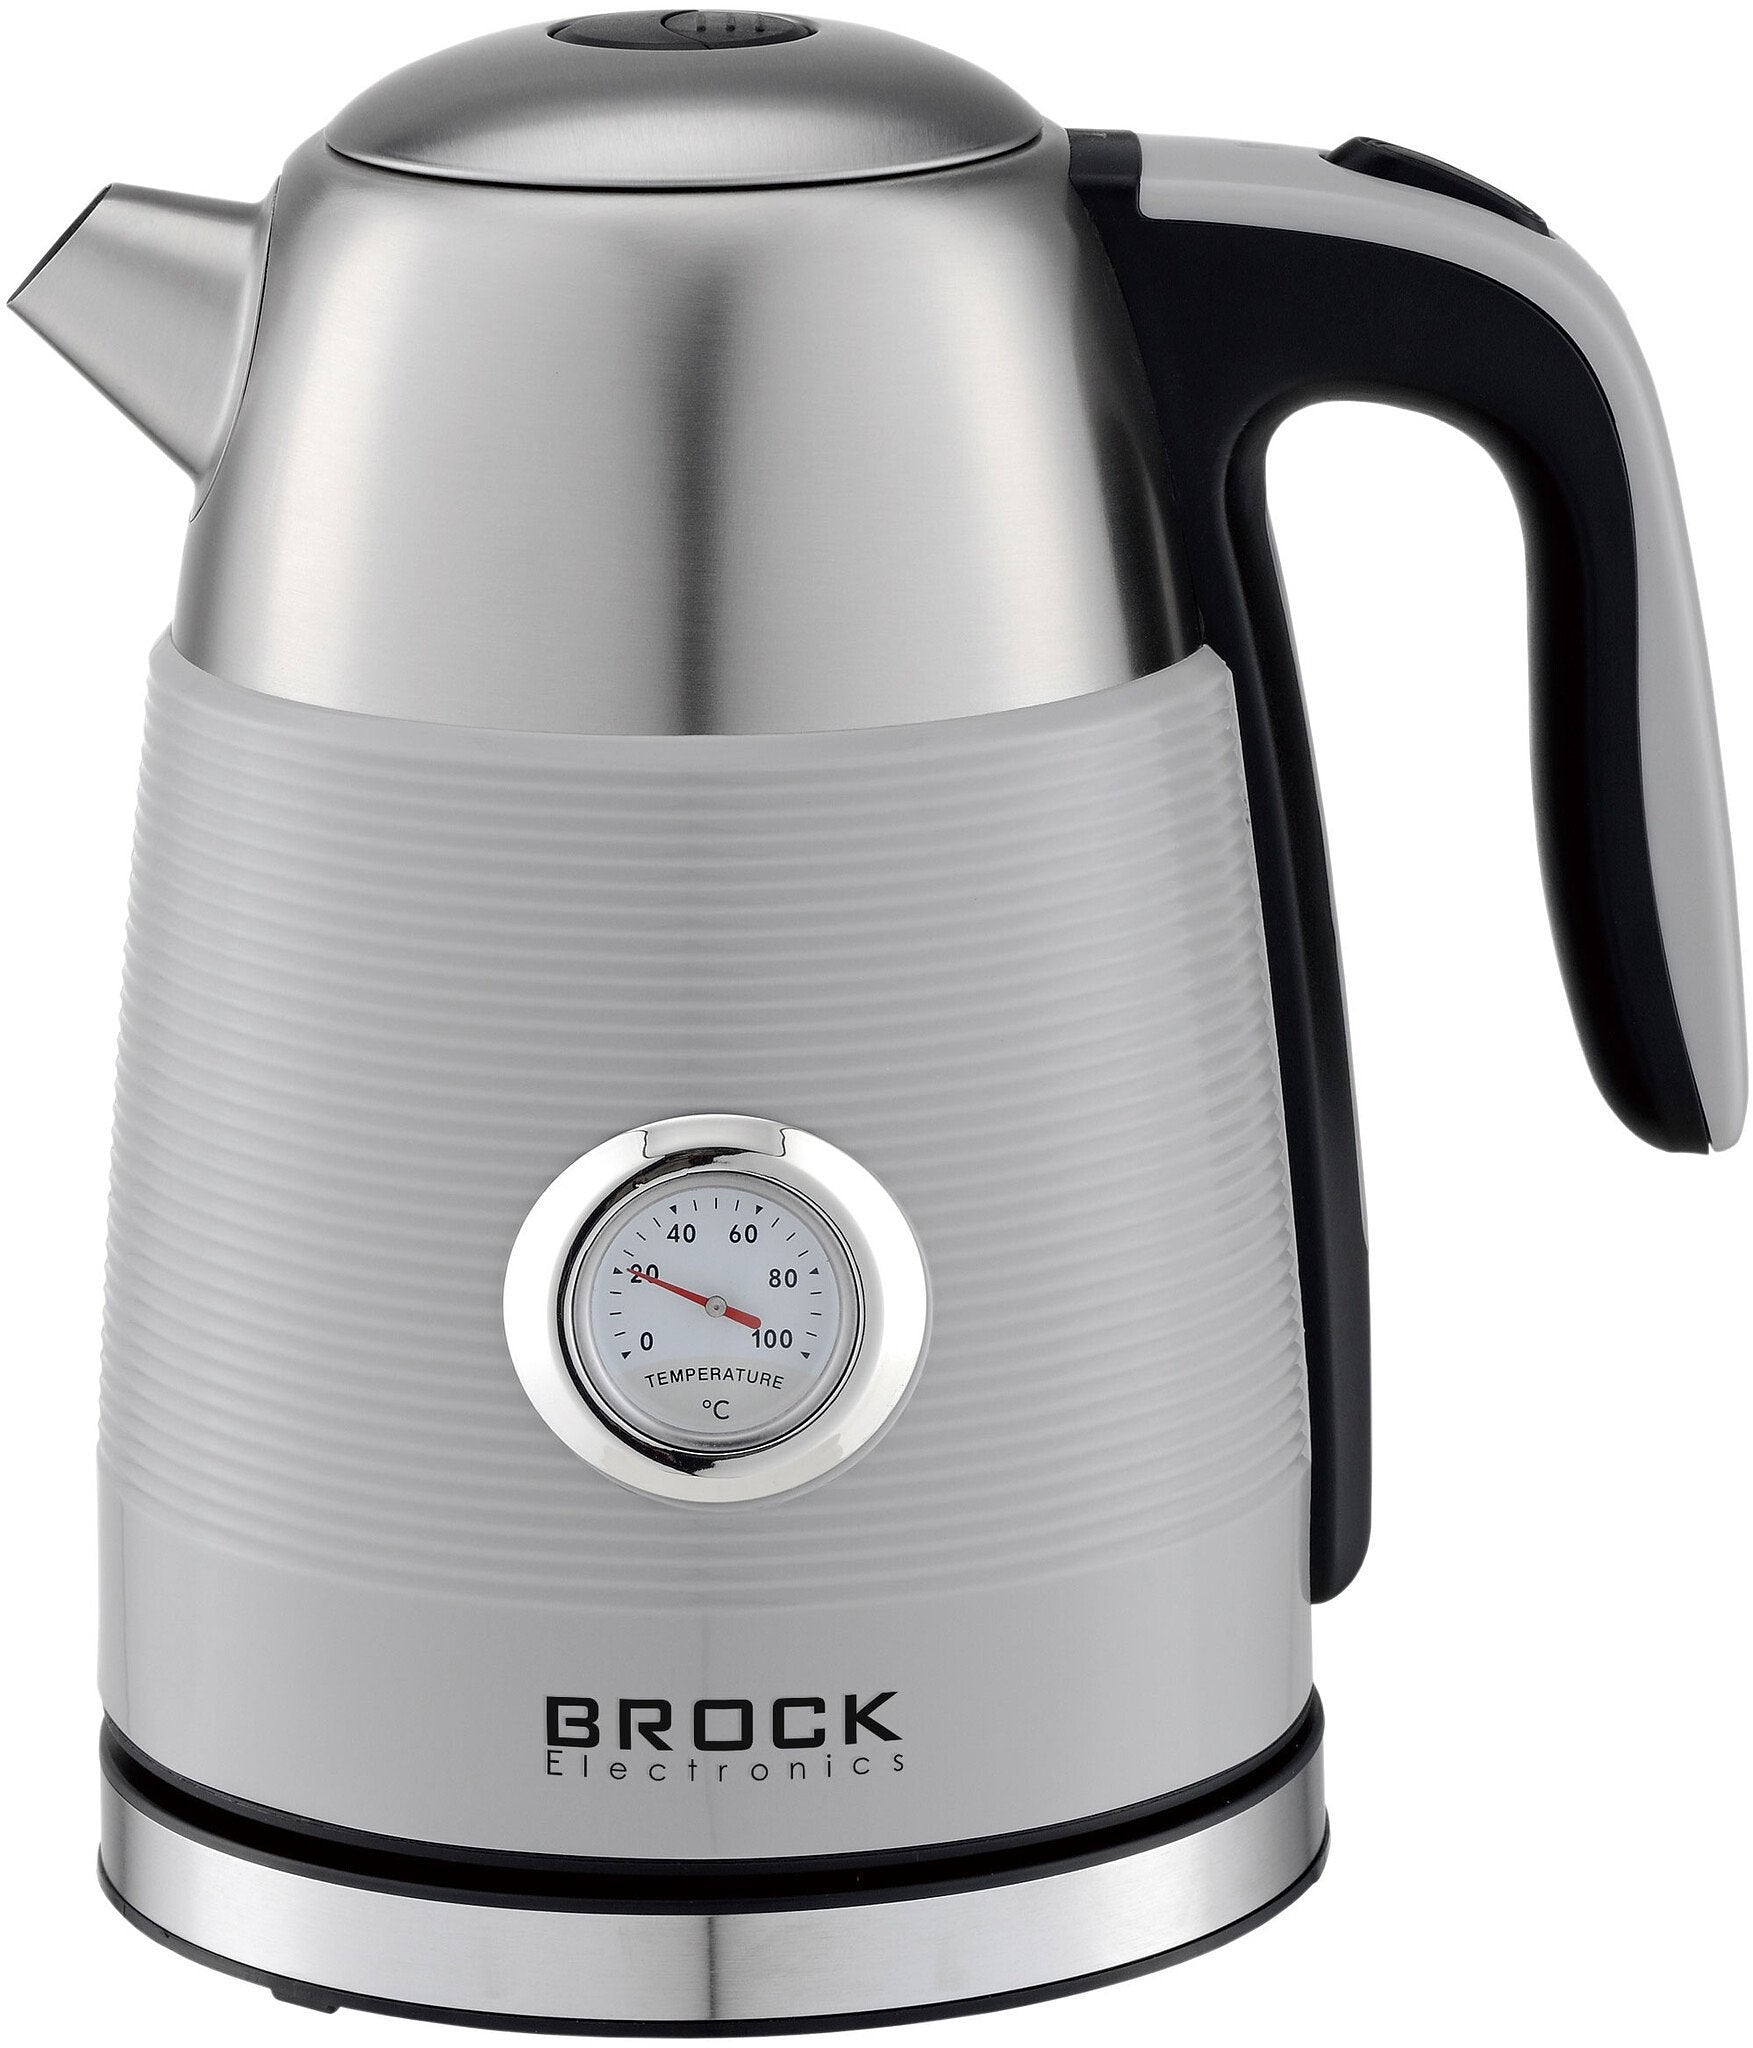 BROCK Electronics Waterkoker WK 9805 GY (Zilver, Thermometer, 1.7 liter)